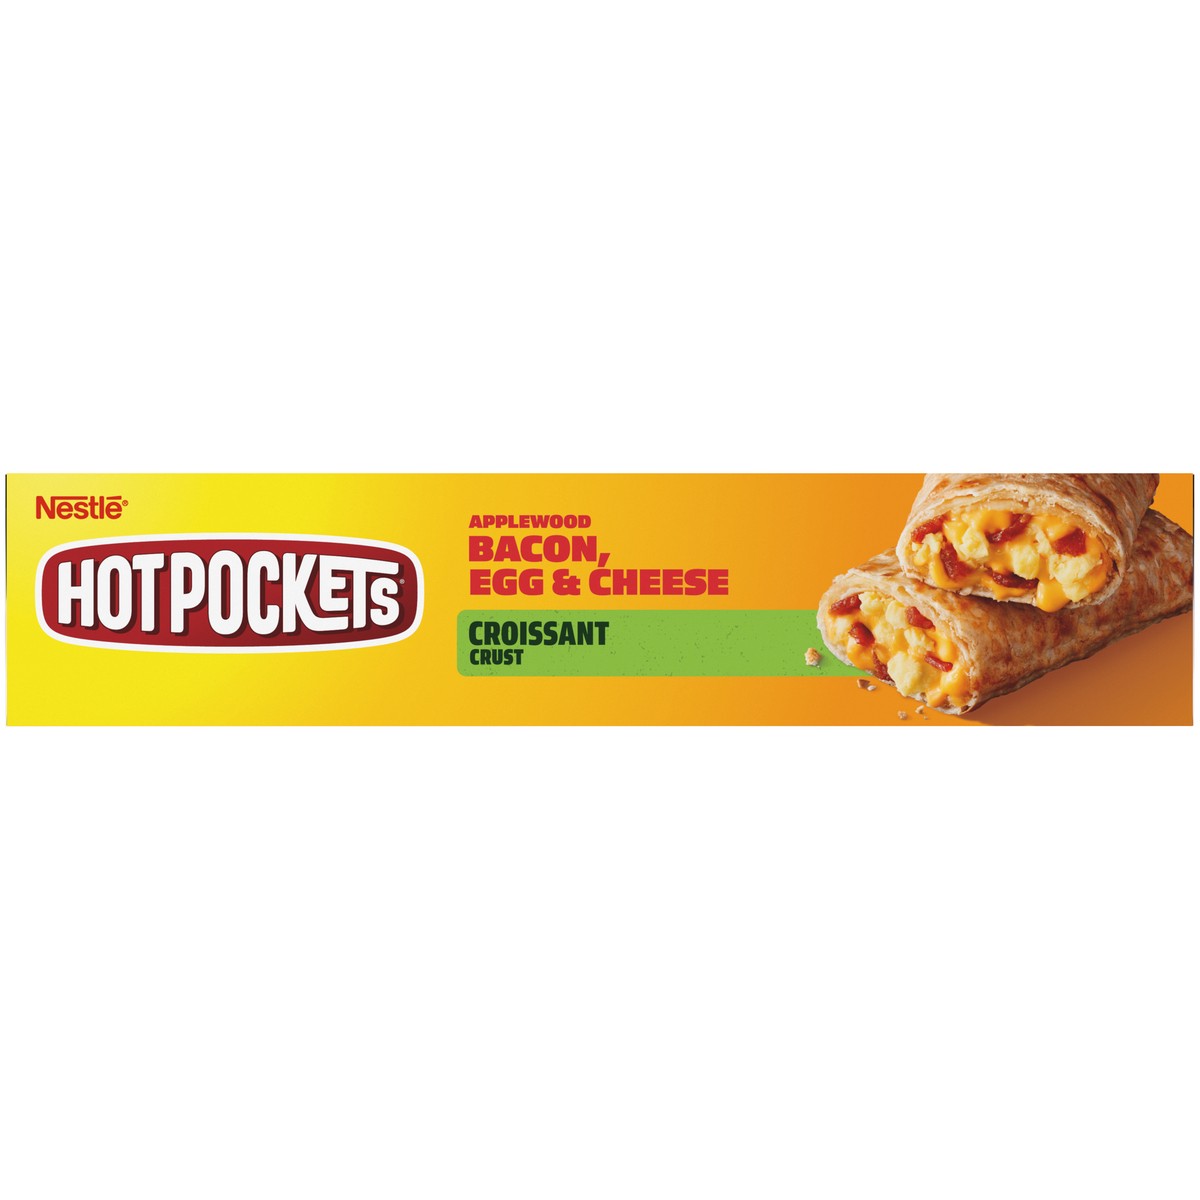 slide 4 of 9, Hot Pockets Applewood Bacon, Egg & Cheese Croissant Crust Frozen Breakfast Sandwiches, Breakfast Hot Pockets Made with Cheddar Cheese, 2 Count, 8.5 oz